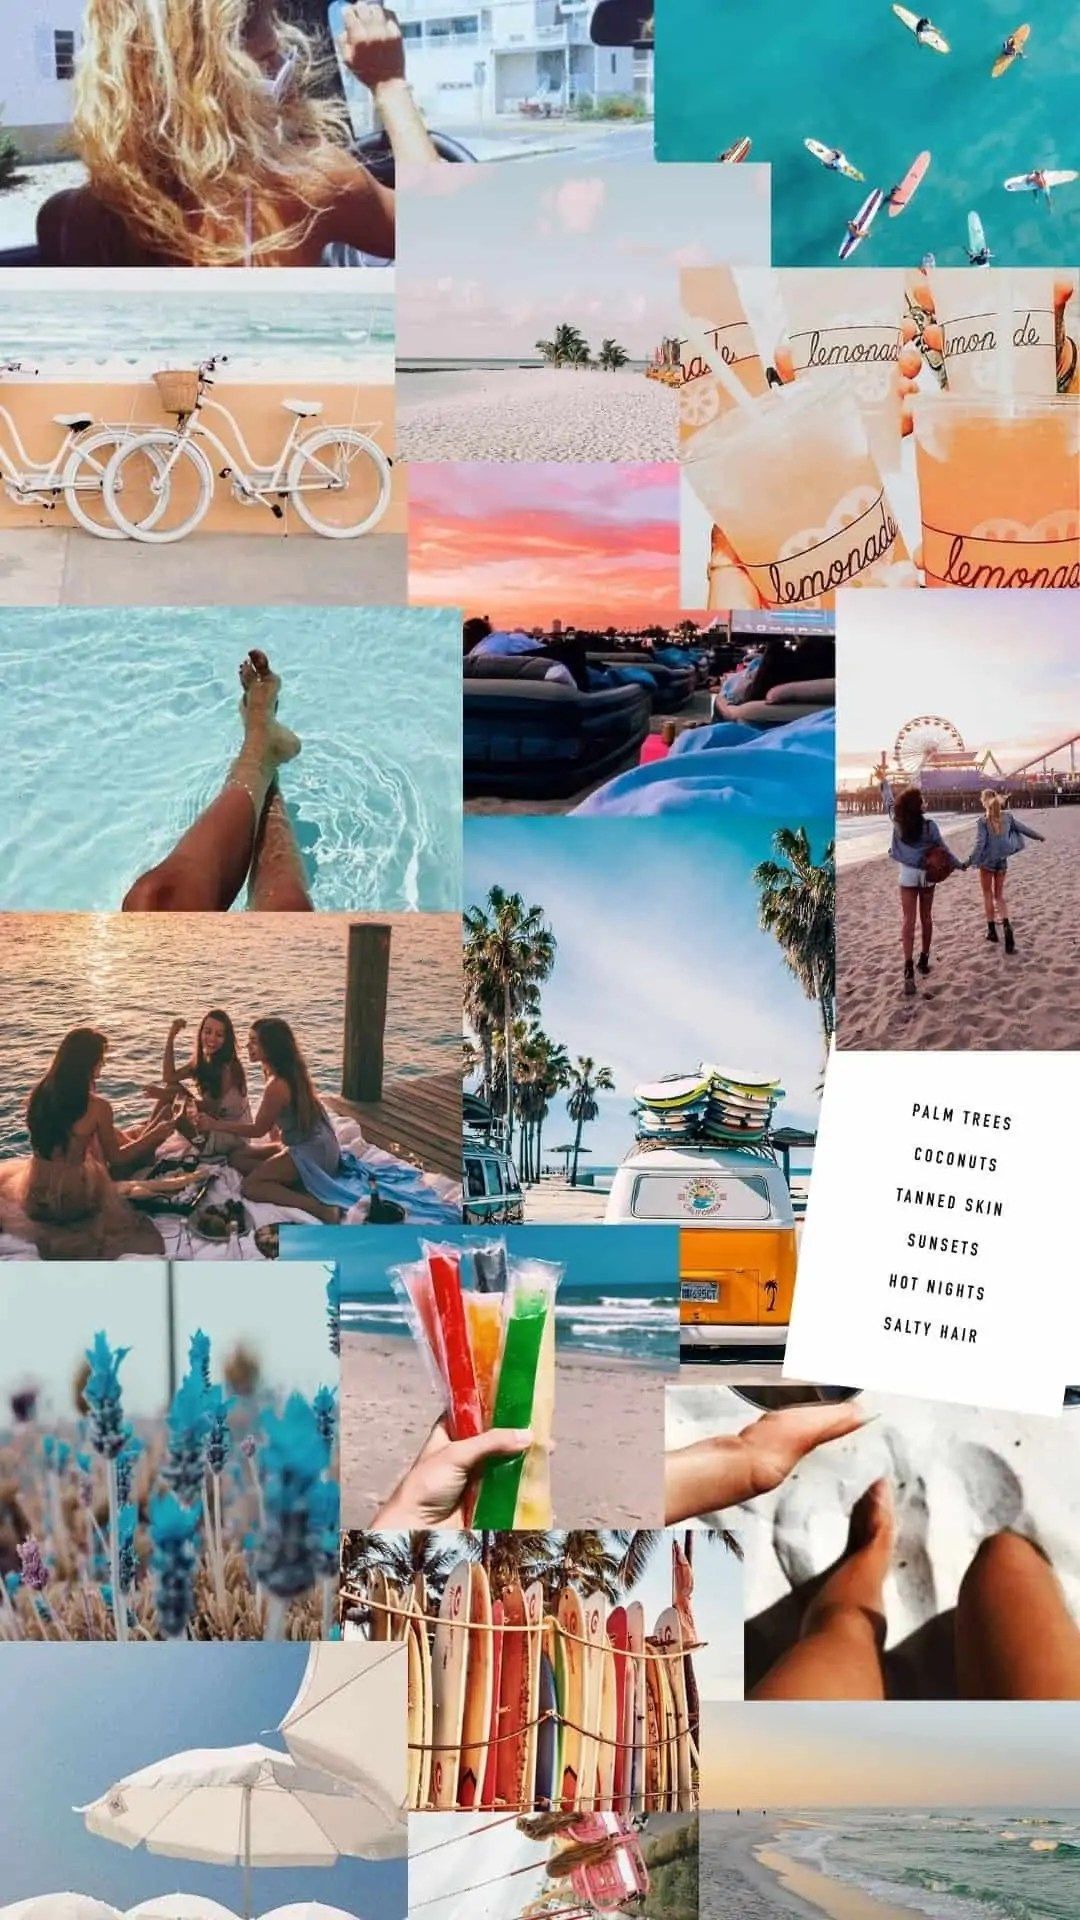 A collage of beach photos including girls, drinks, a bike, and a beach - Summer